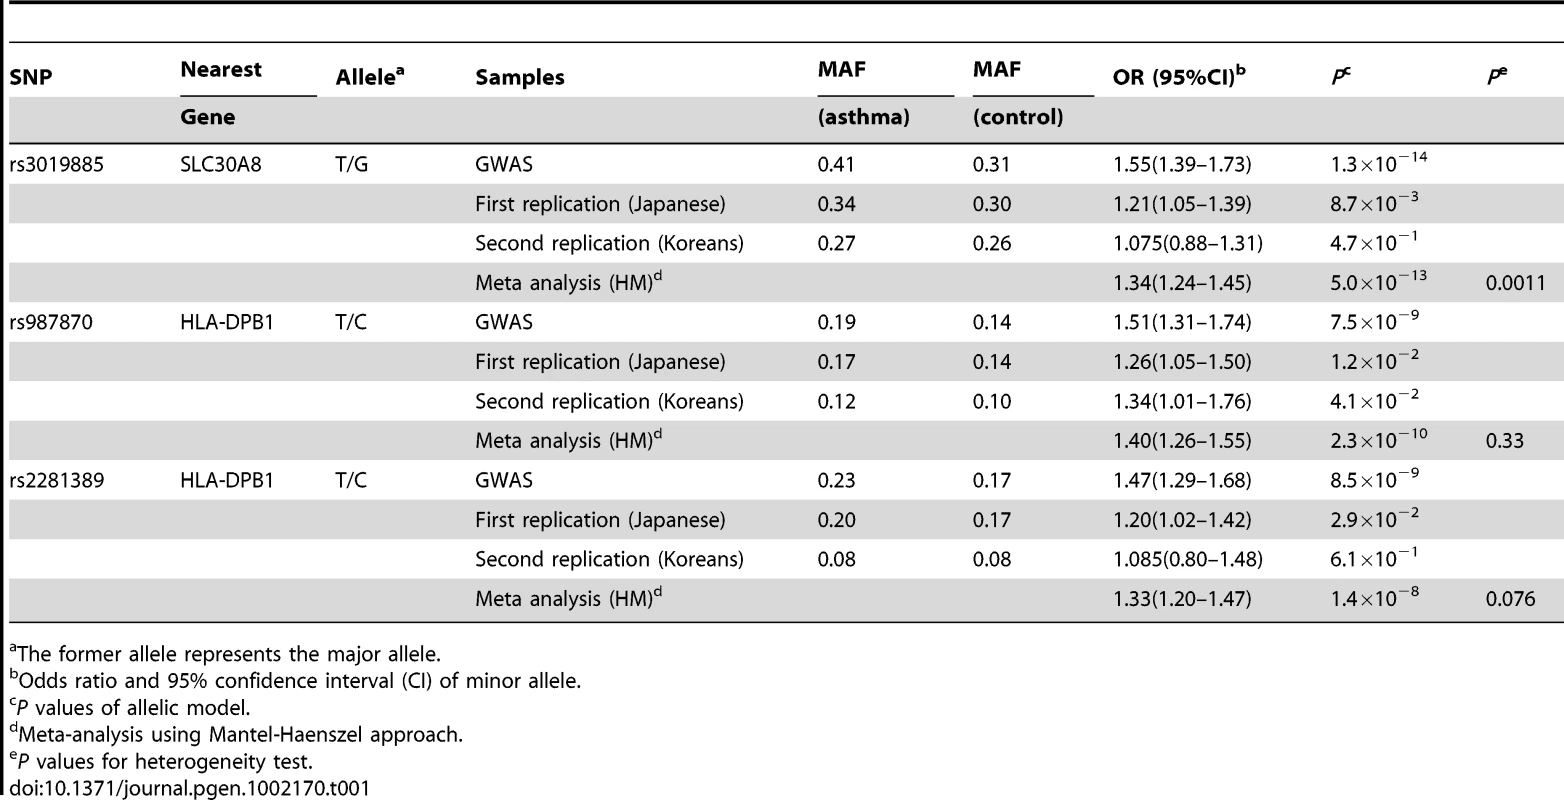 Results of GWAS and replication studies for 4 SNPs.